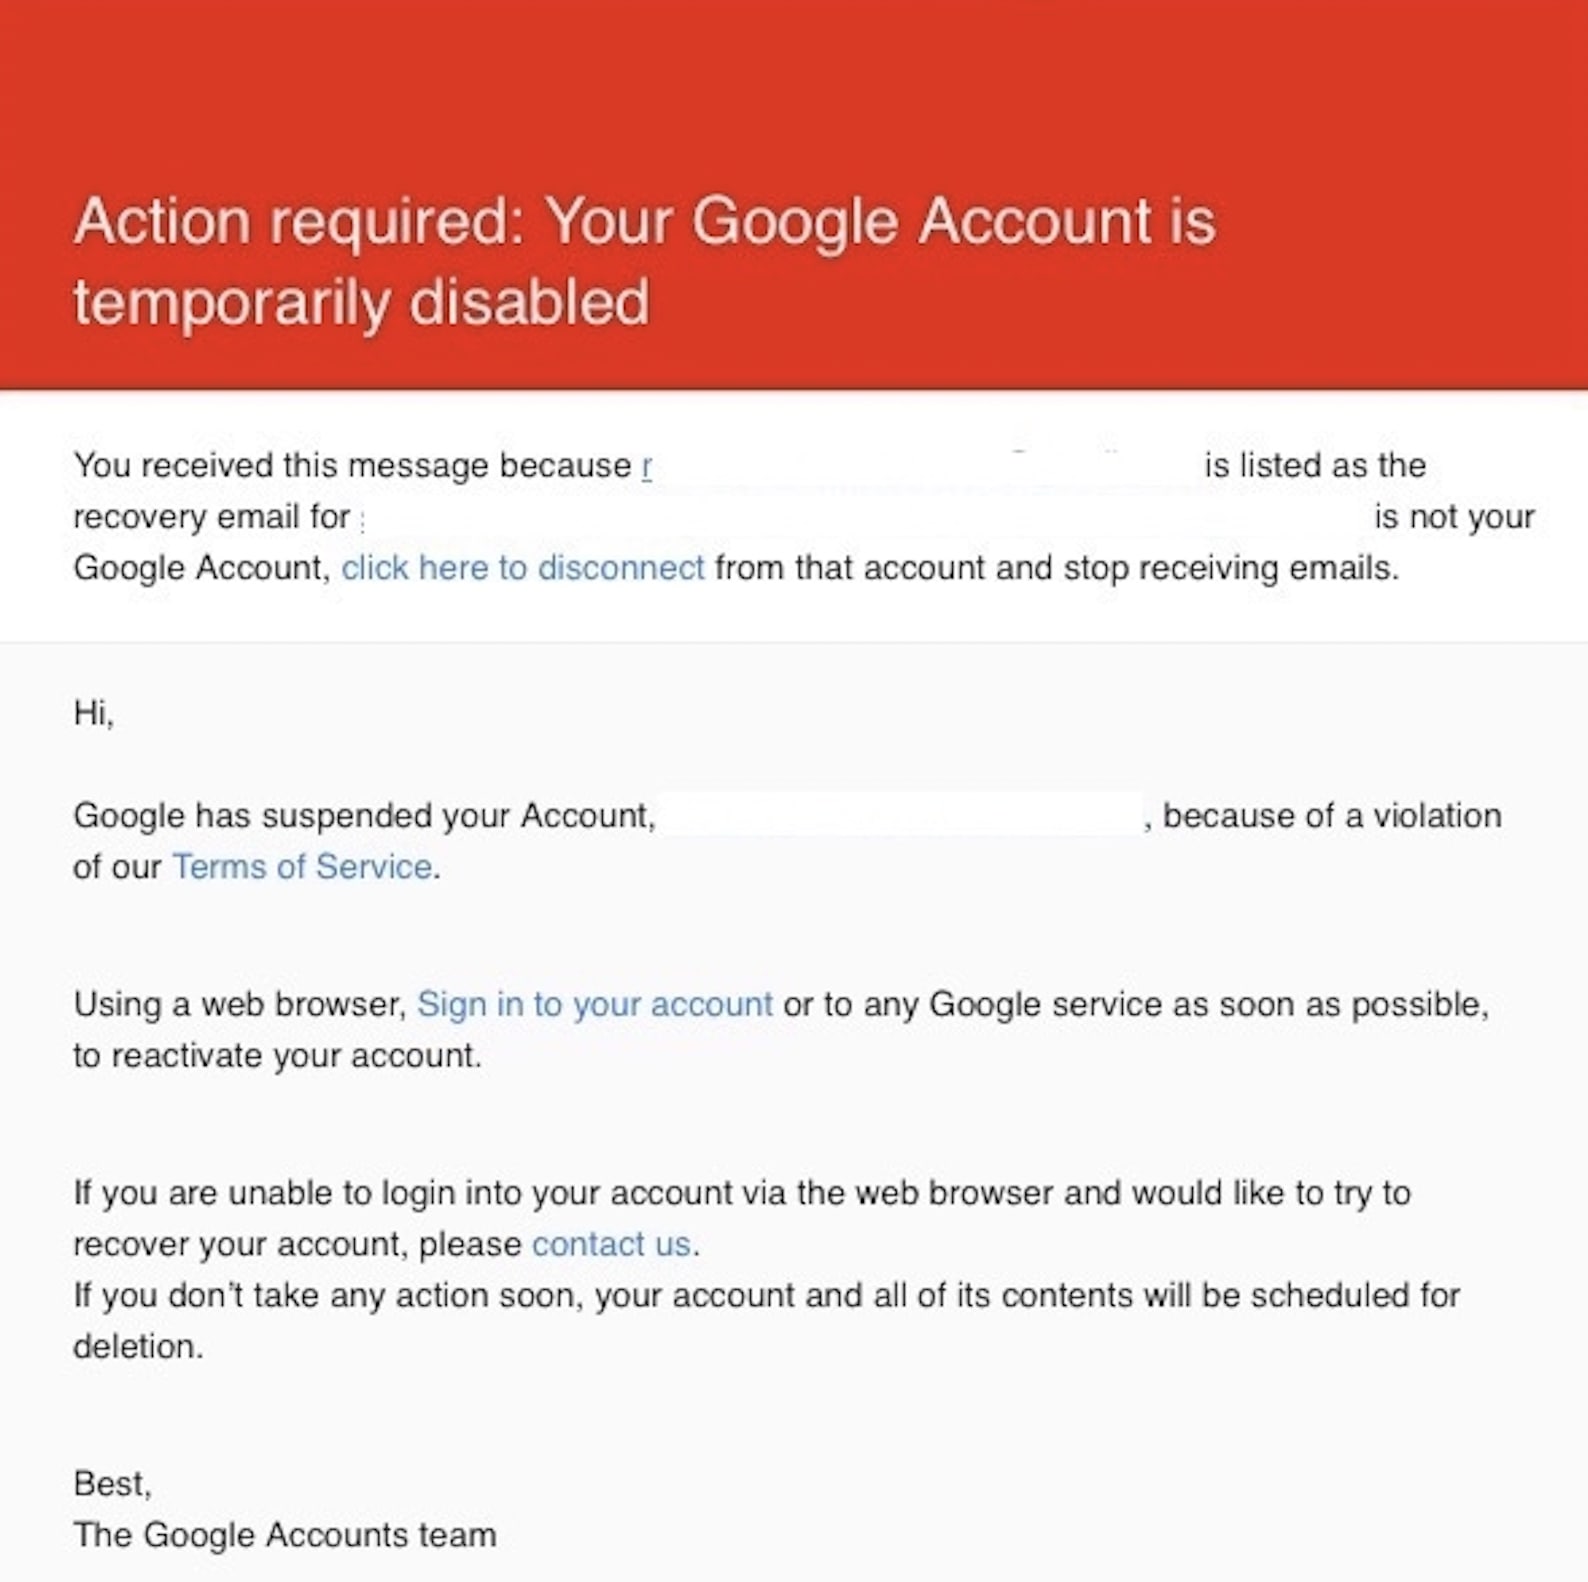 Your Gmail account is blocked